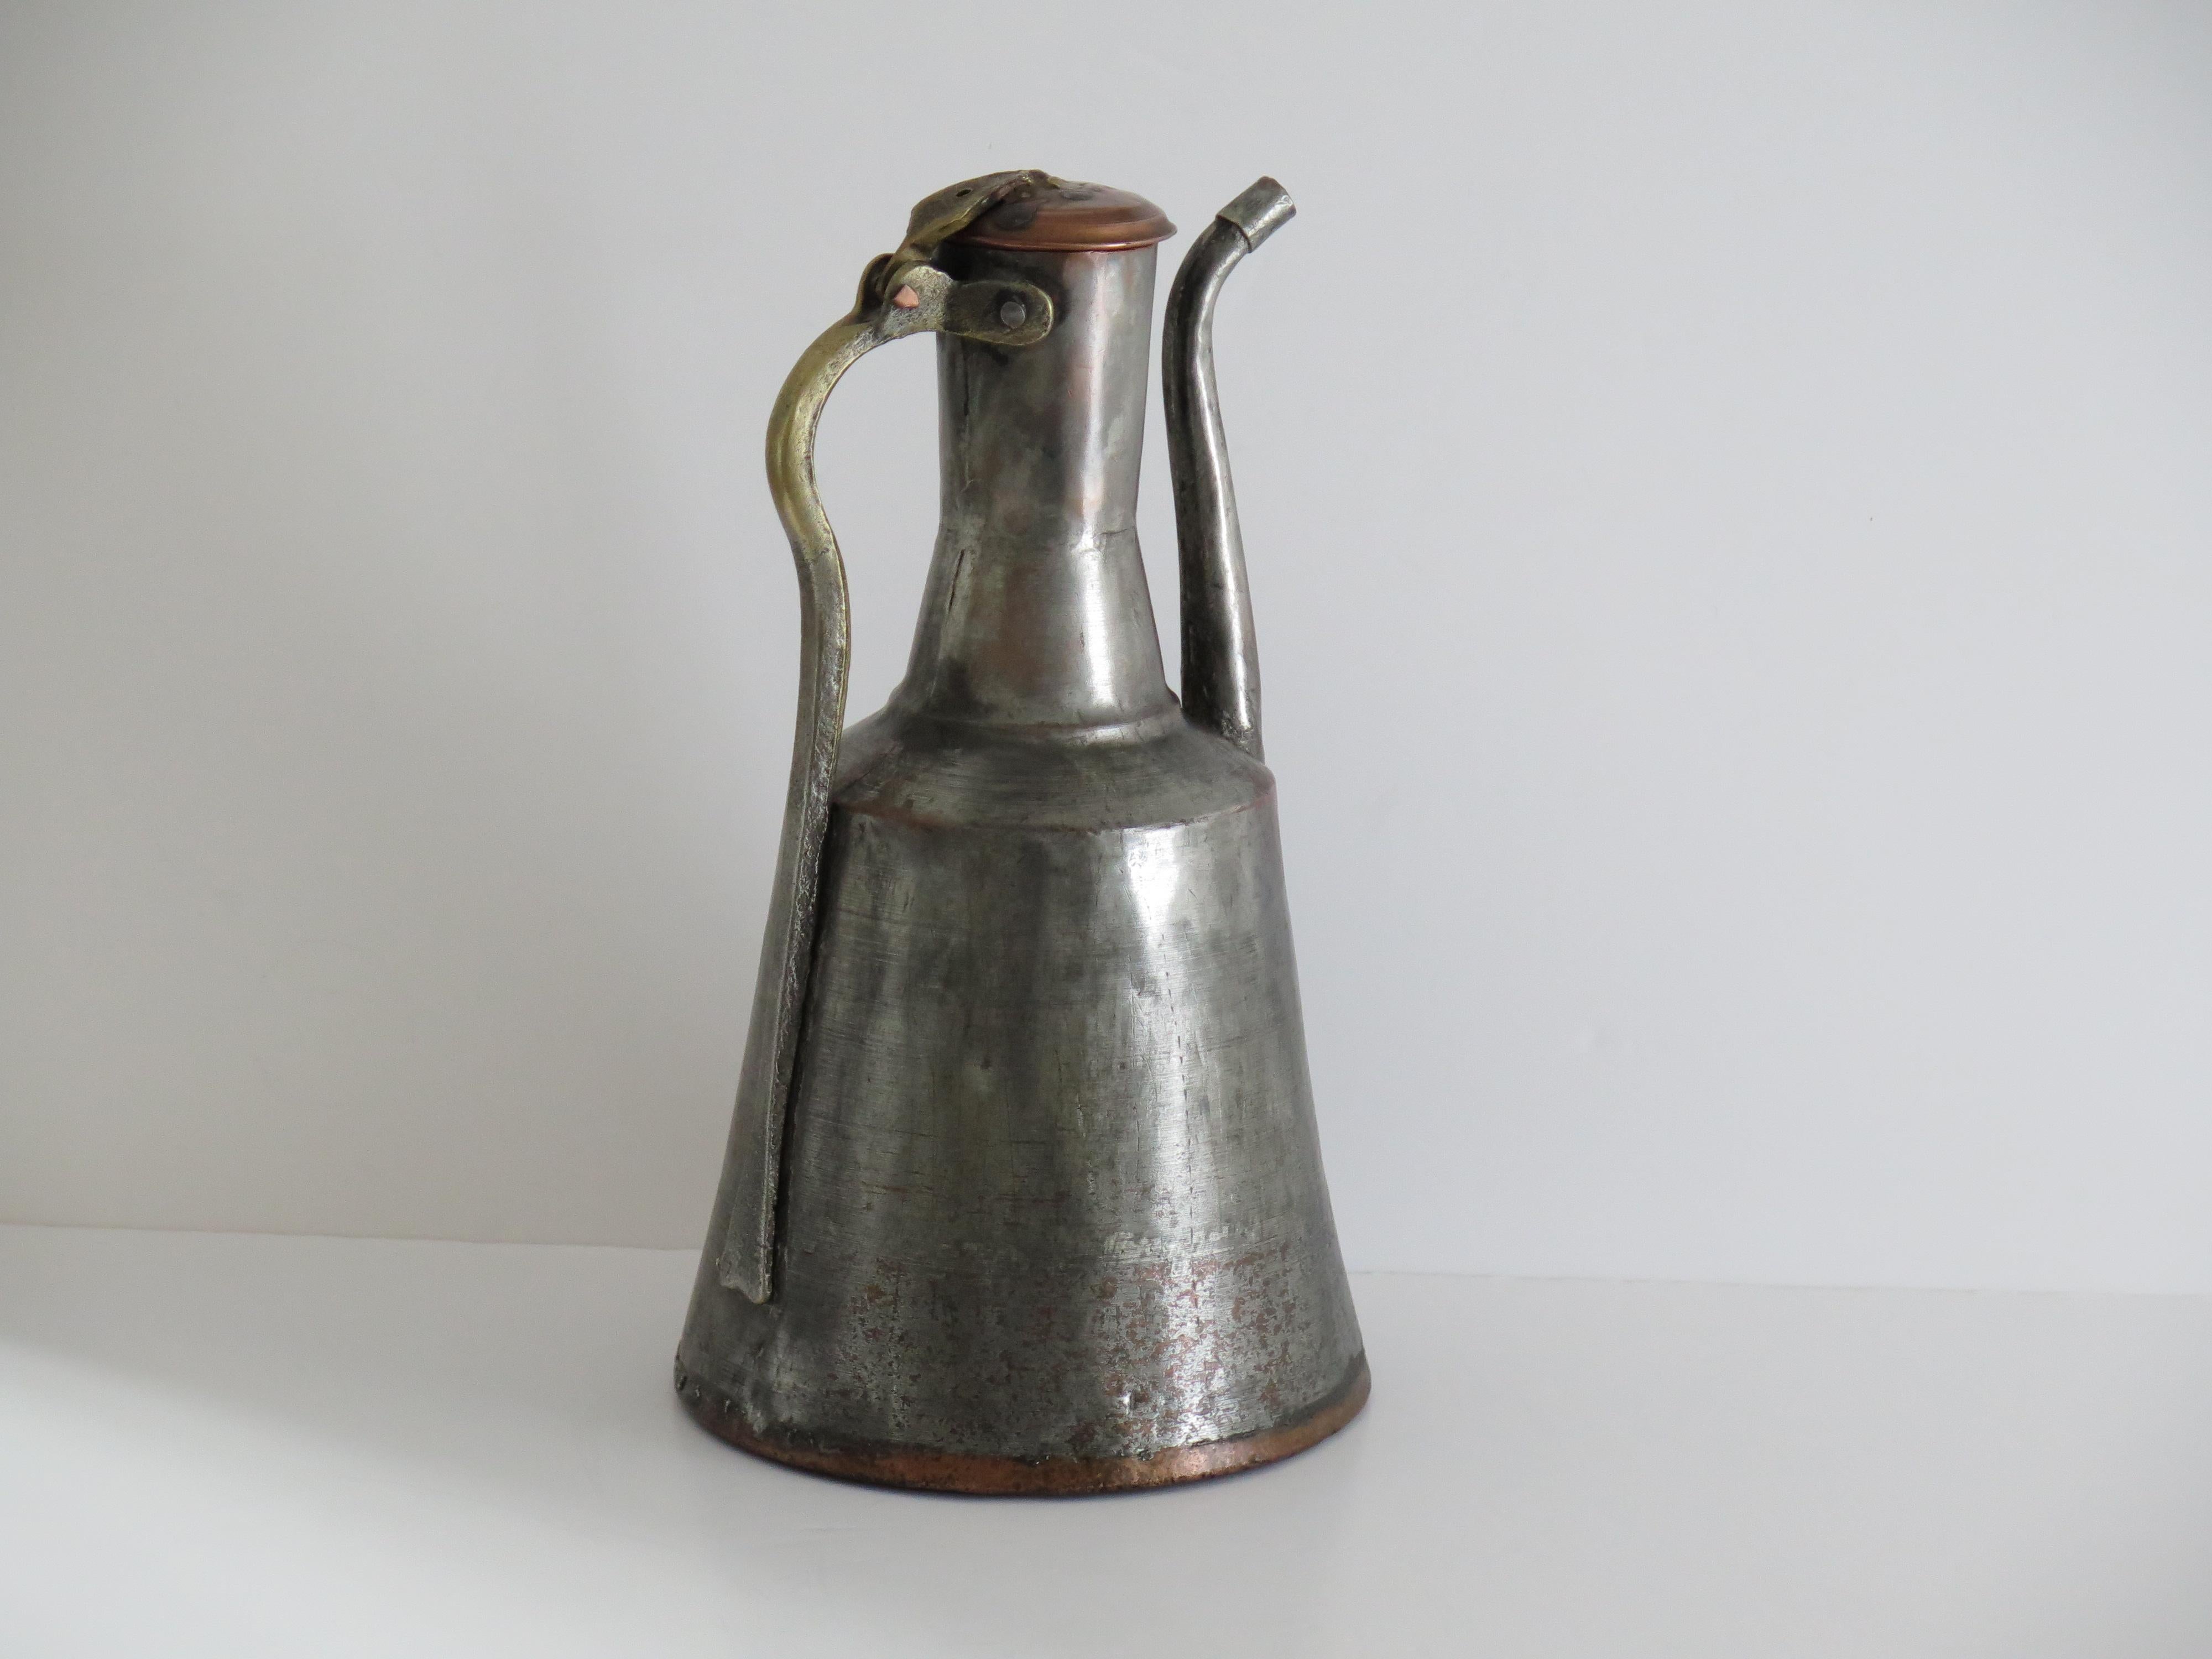 Ewer or Pitcher tinned Copper Turkish / Middle Eastern, Early 19th Century For Sale 9